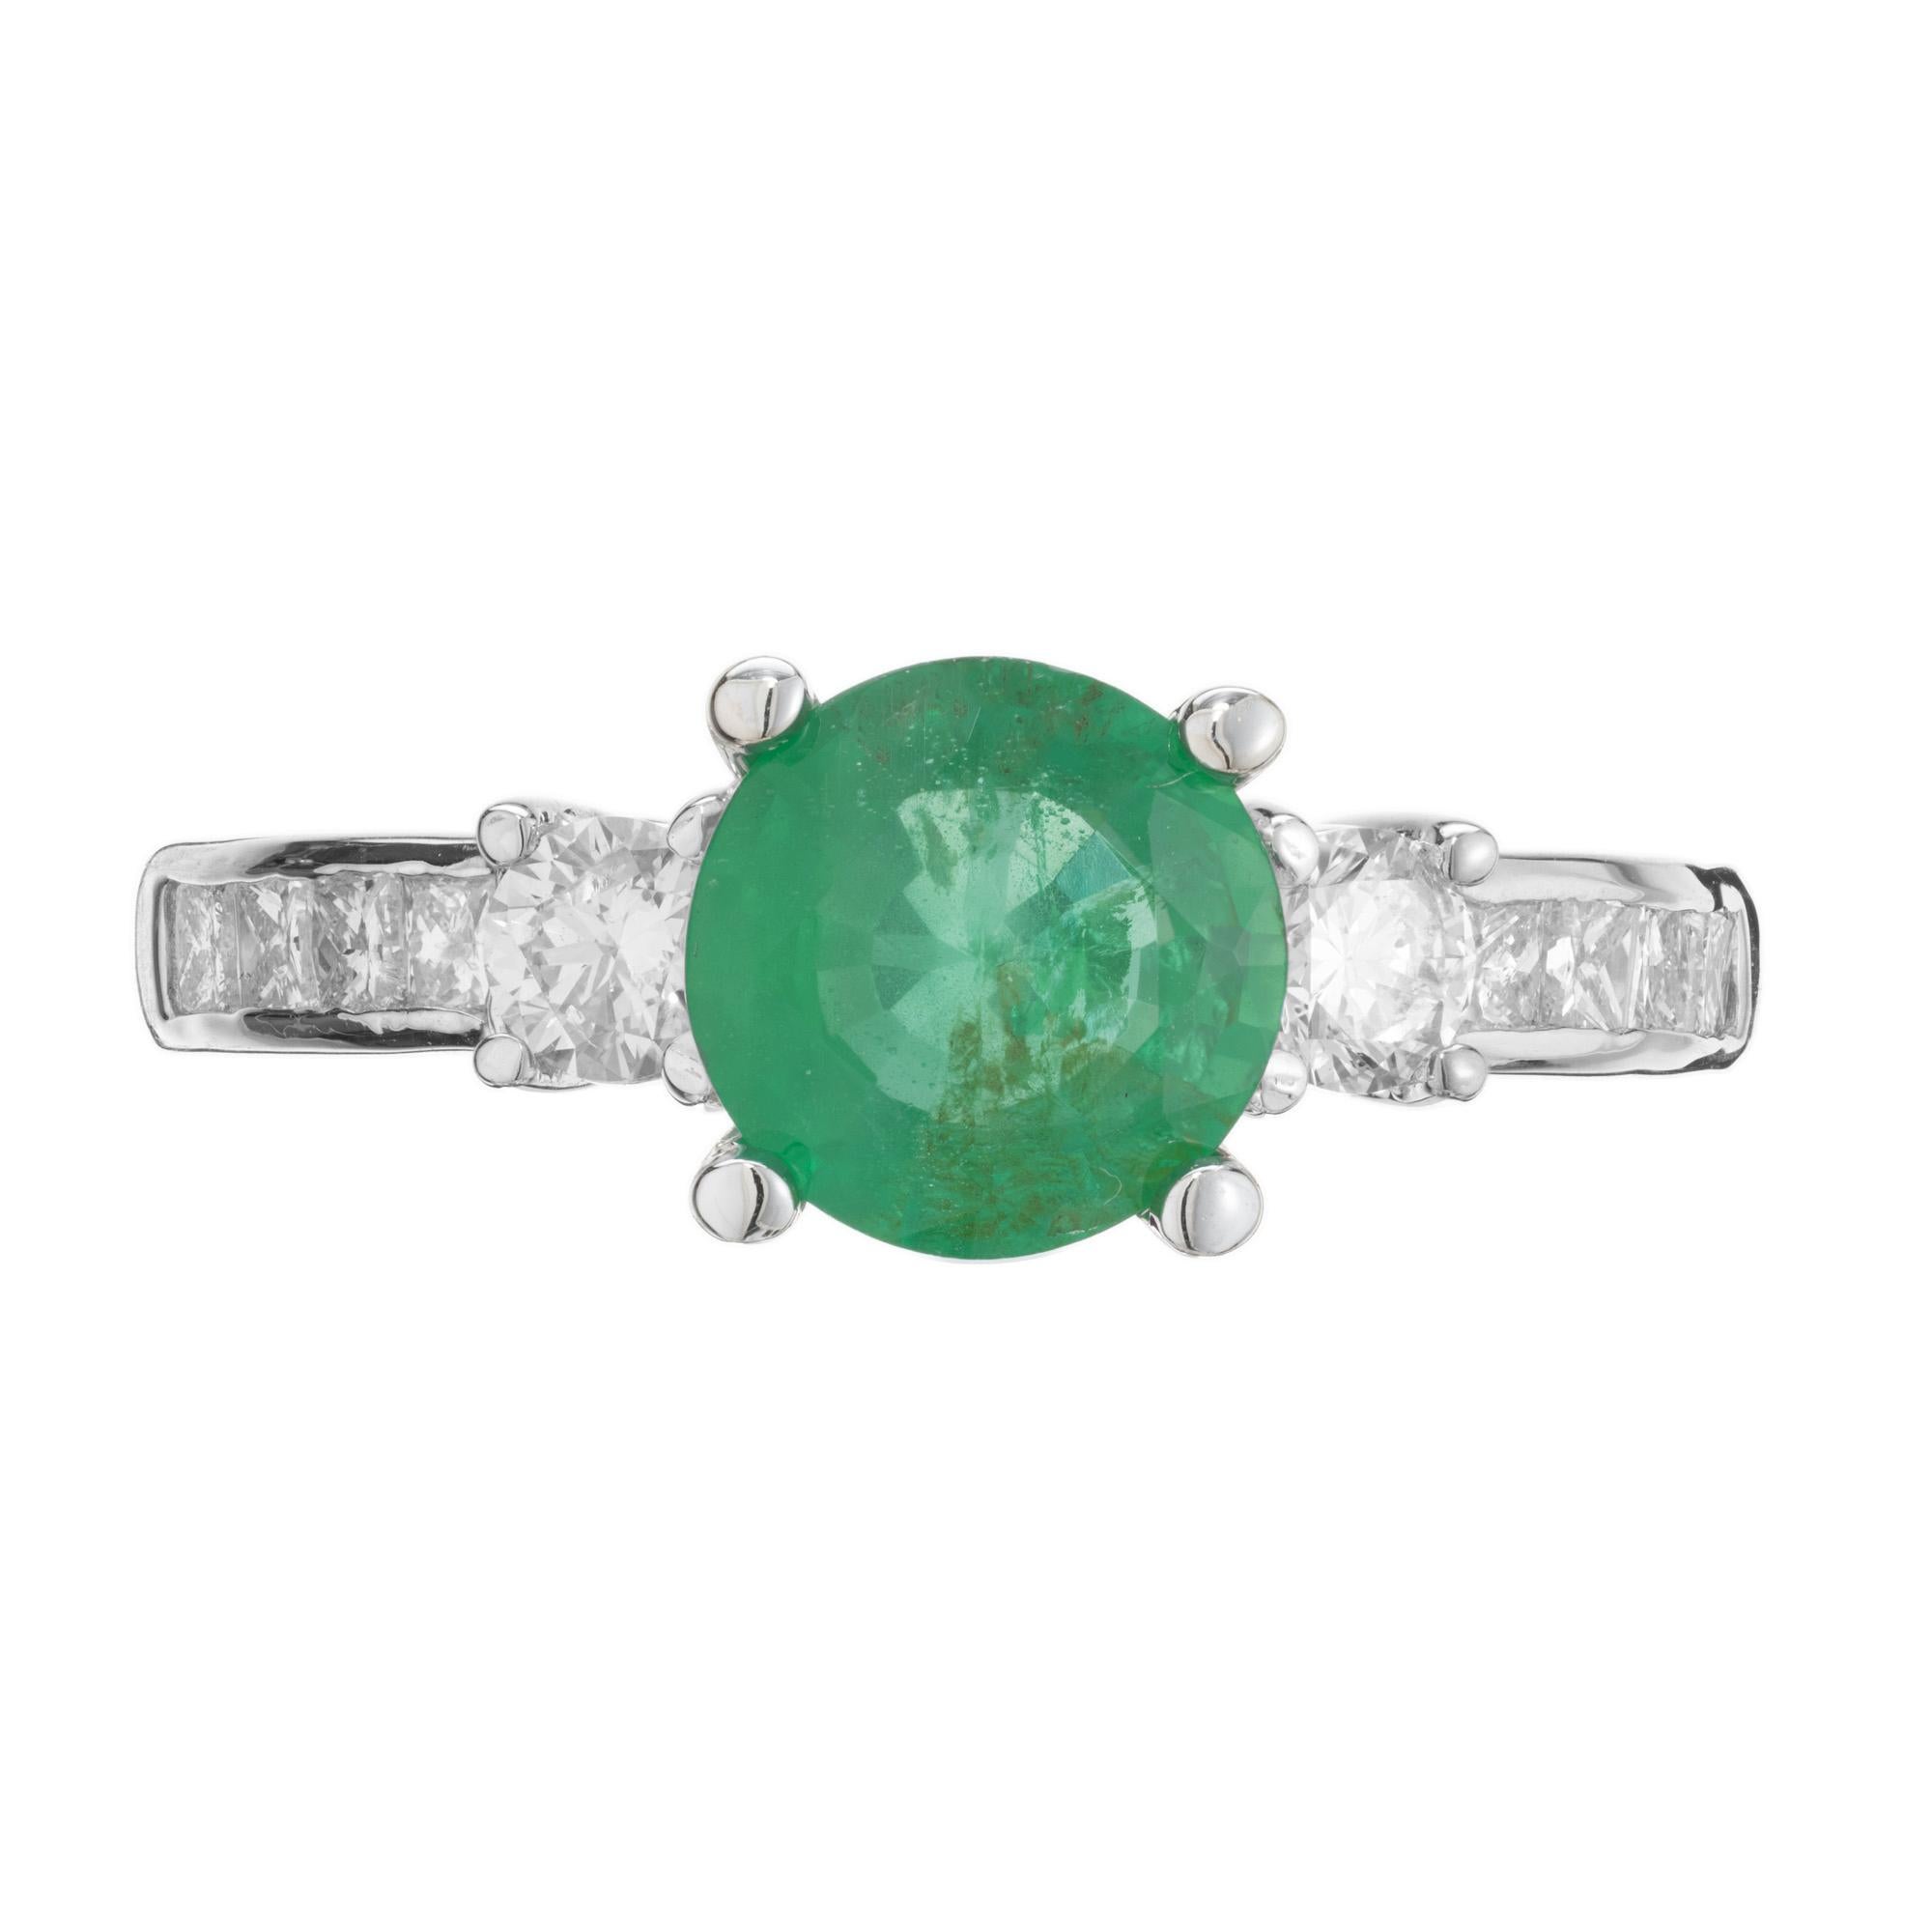 Emerald and diamond three-stone engagement ring. GIA certified natural round emerald center stone, mounted in a 14k white gold setting with two round brilliant cut side diamonds, accented with 8 princess cut diamonds, 4 on each side, along the